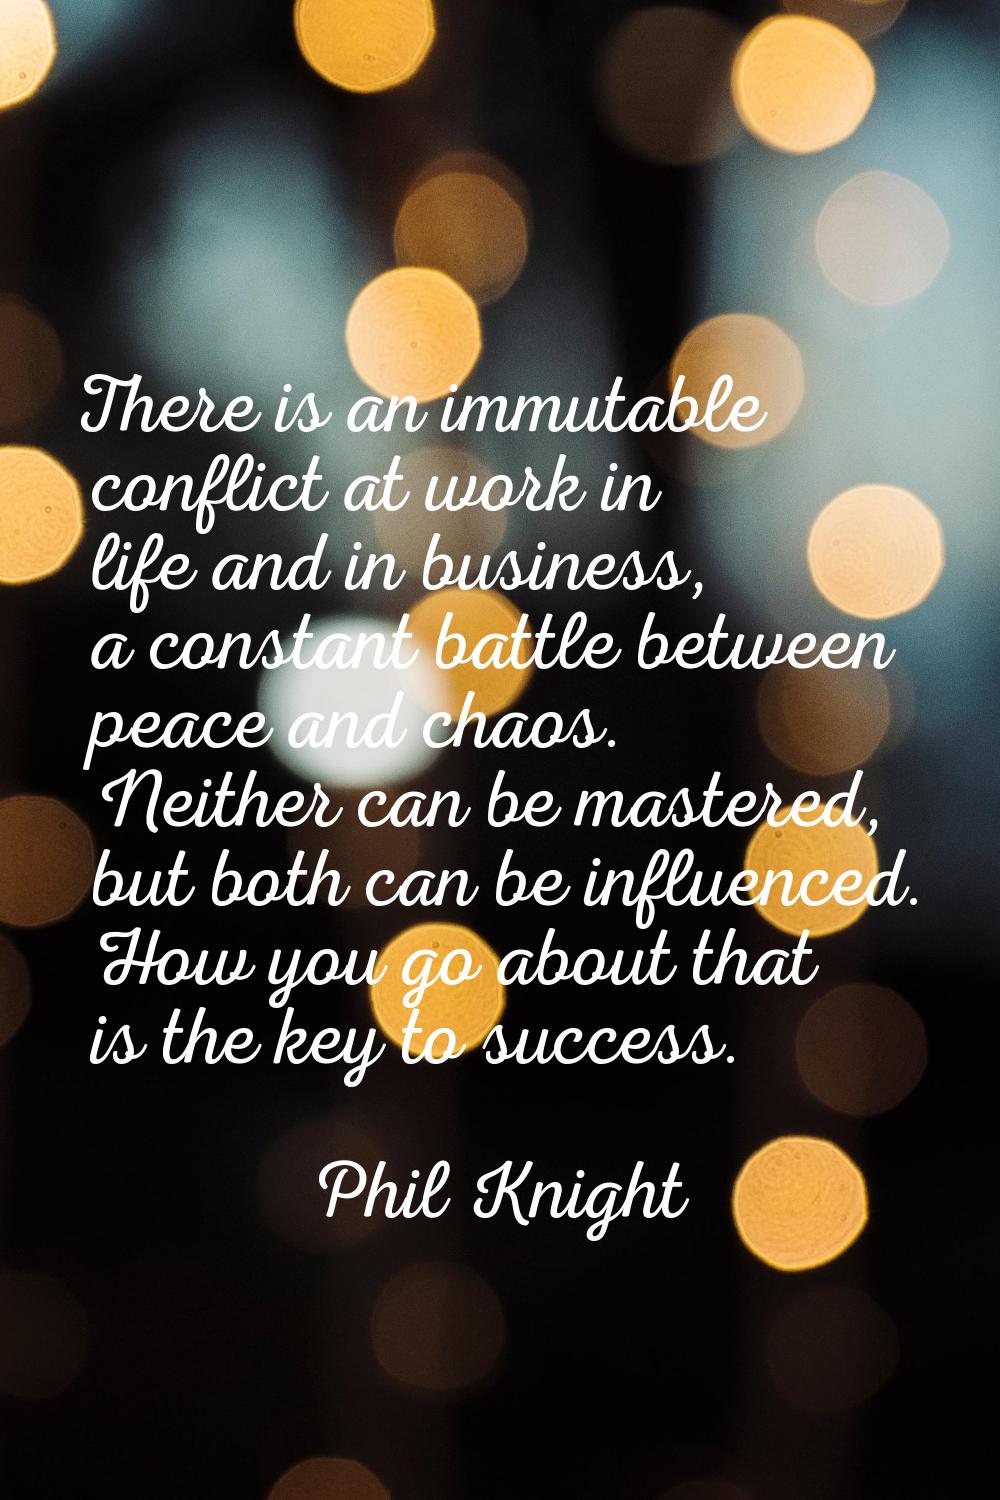 There is an immutable conflict at work in life and in business, a constant battle between peace and